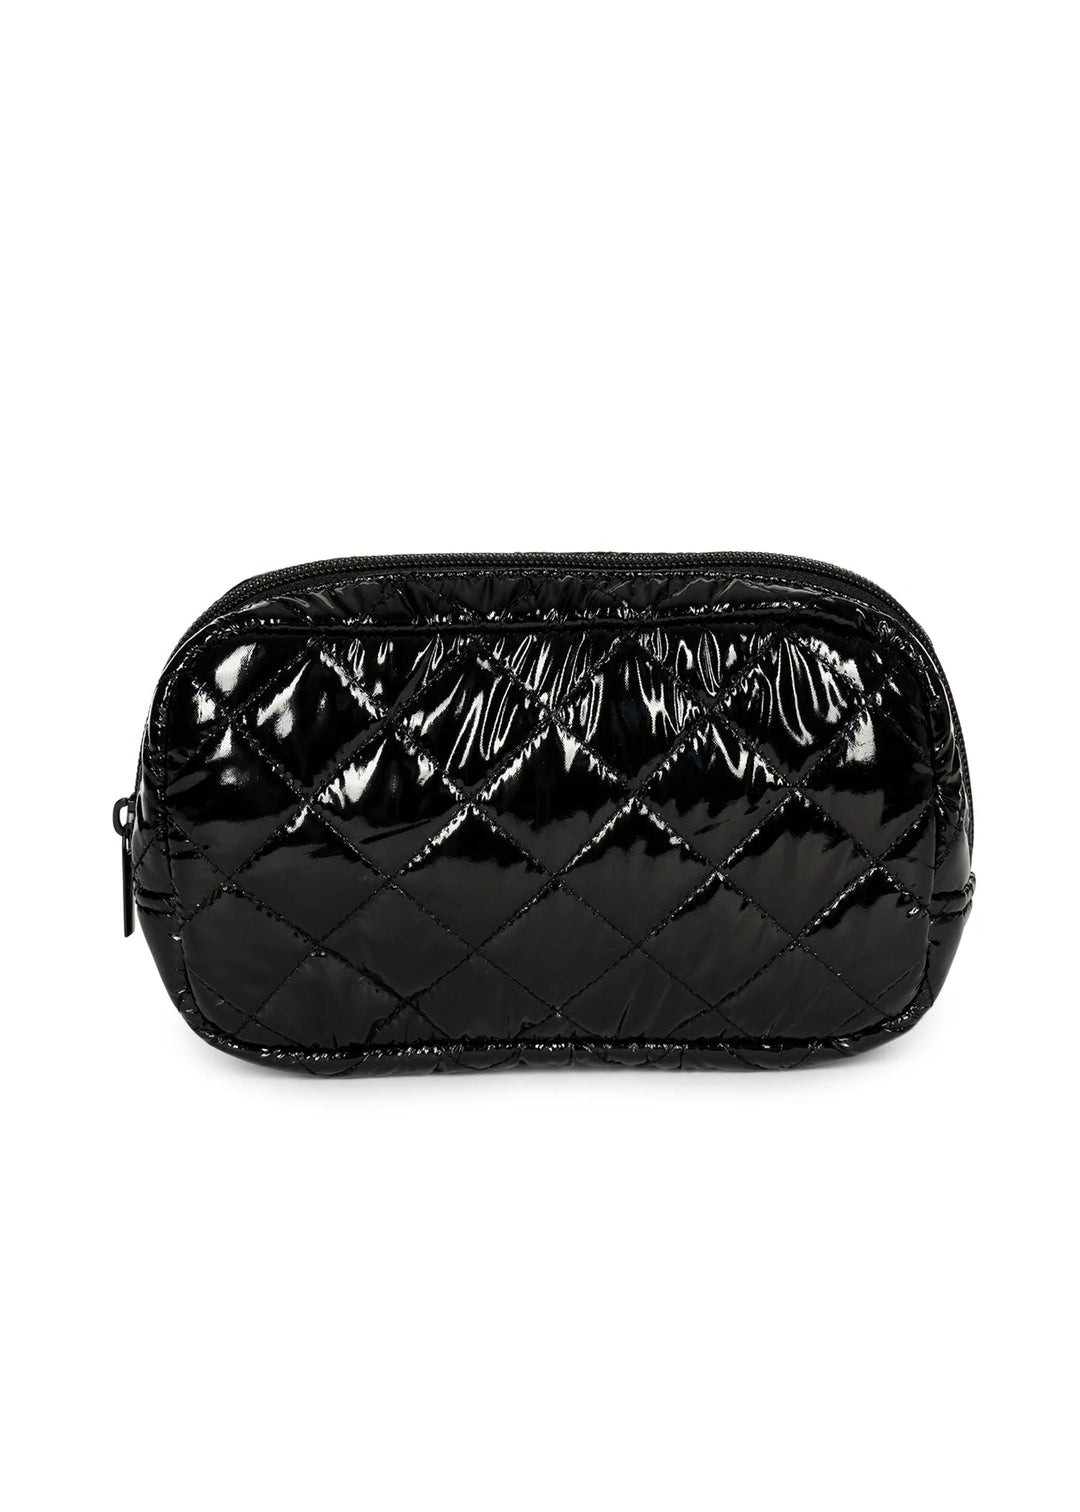 Black Soft Puffer Clutch Oversized Handbag Chic Quilted 